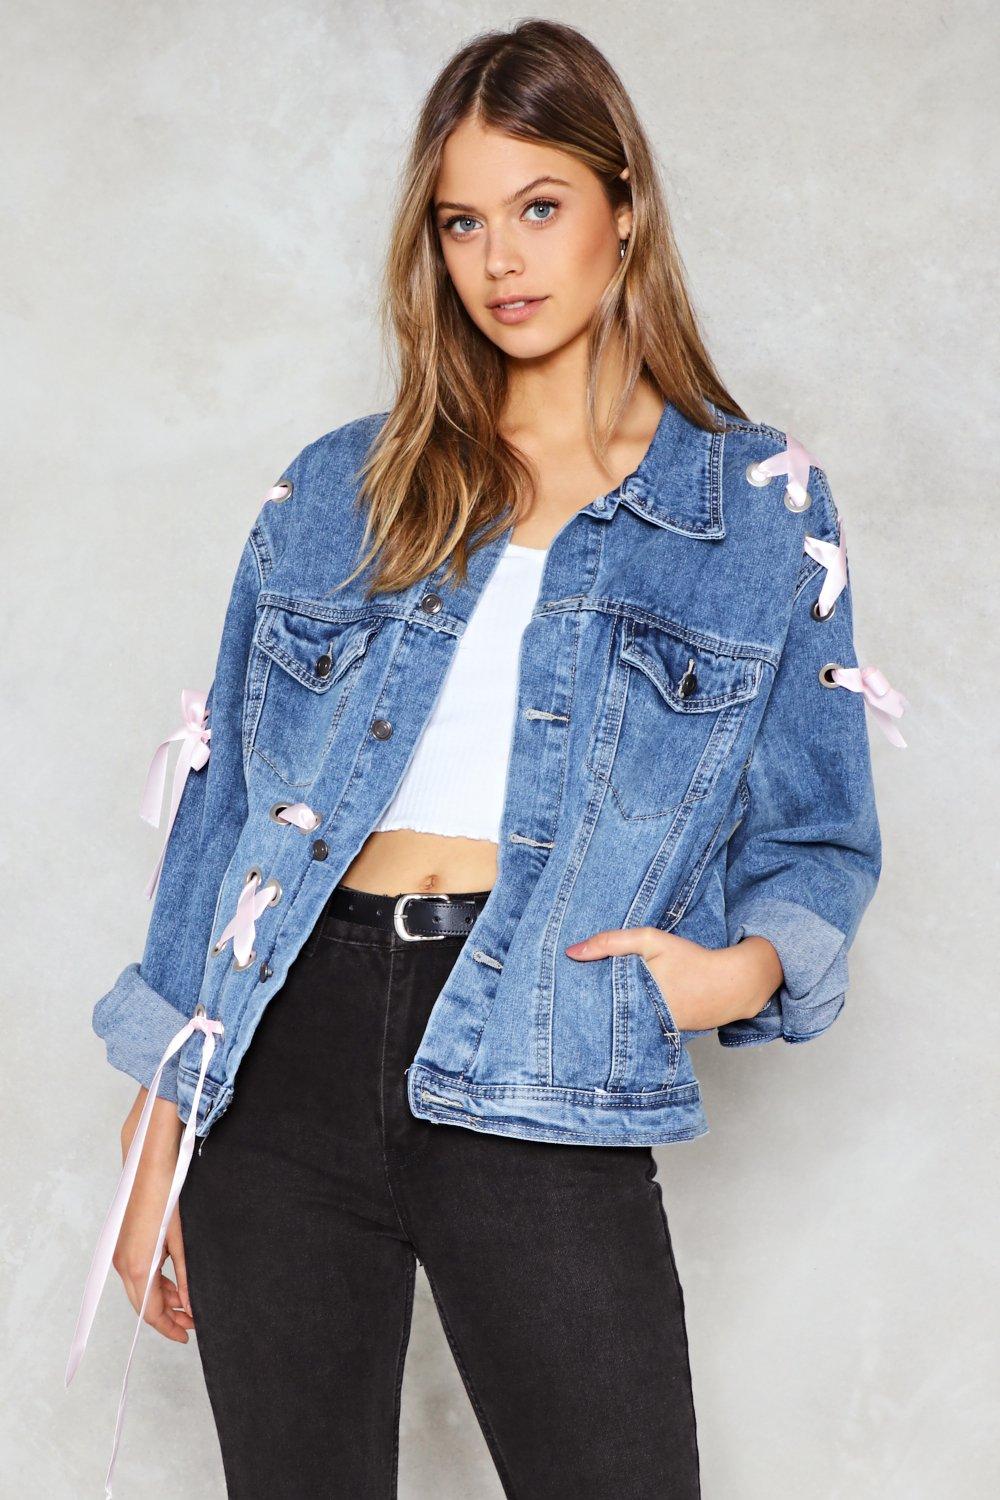 jean jacket with lace